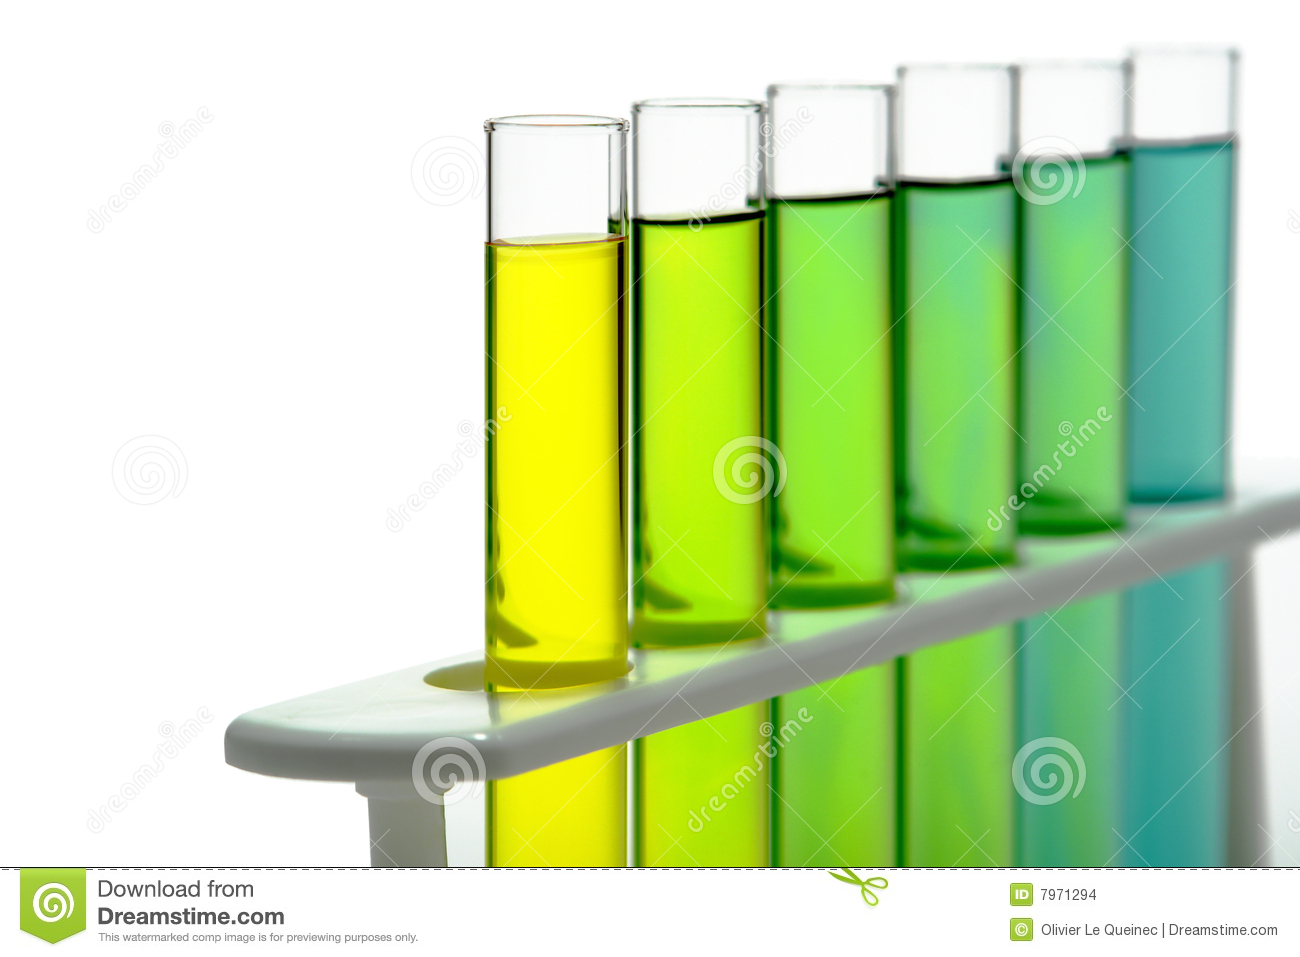 Test Tubes In Science Research Lab Stock Images   Image  7971294